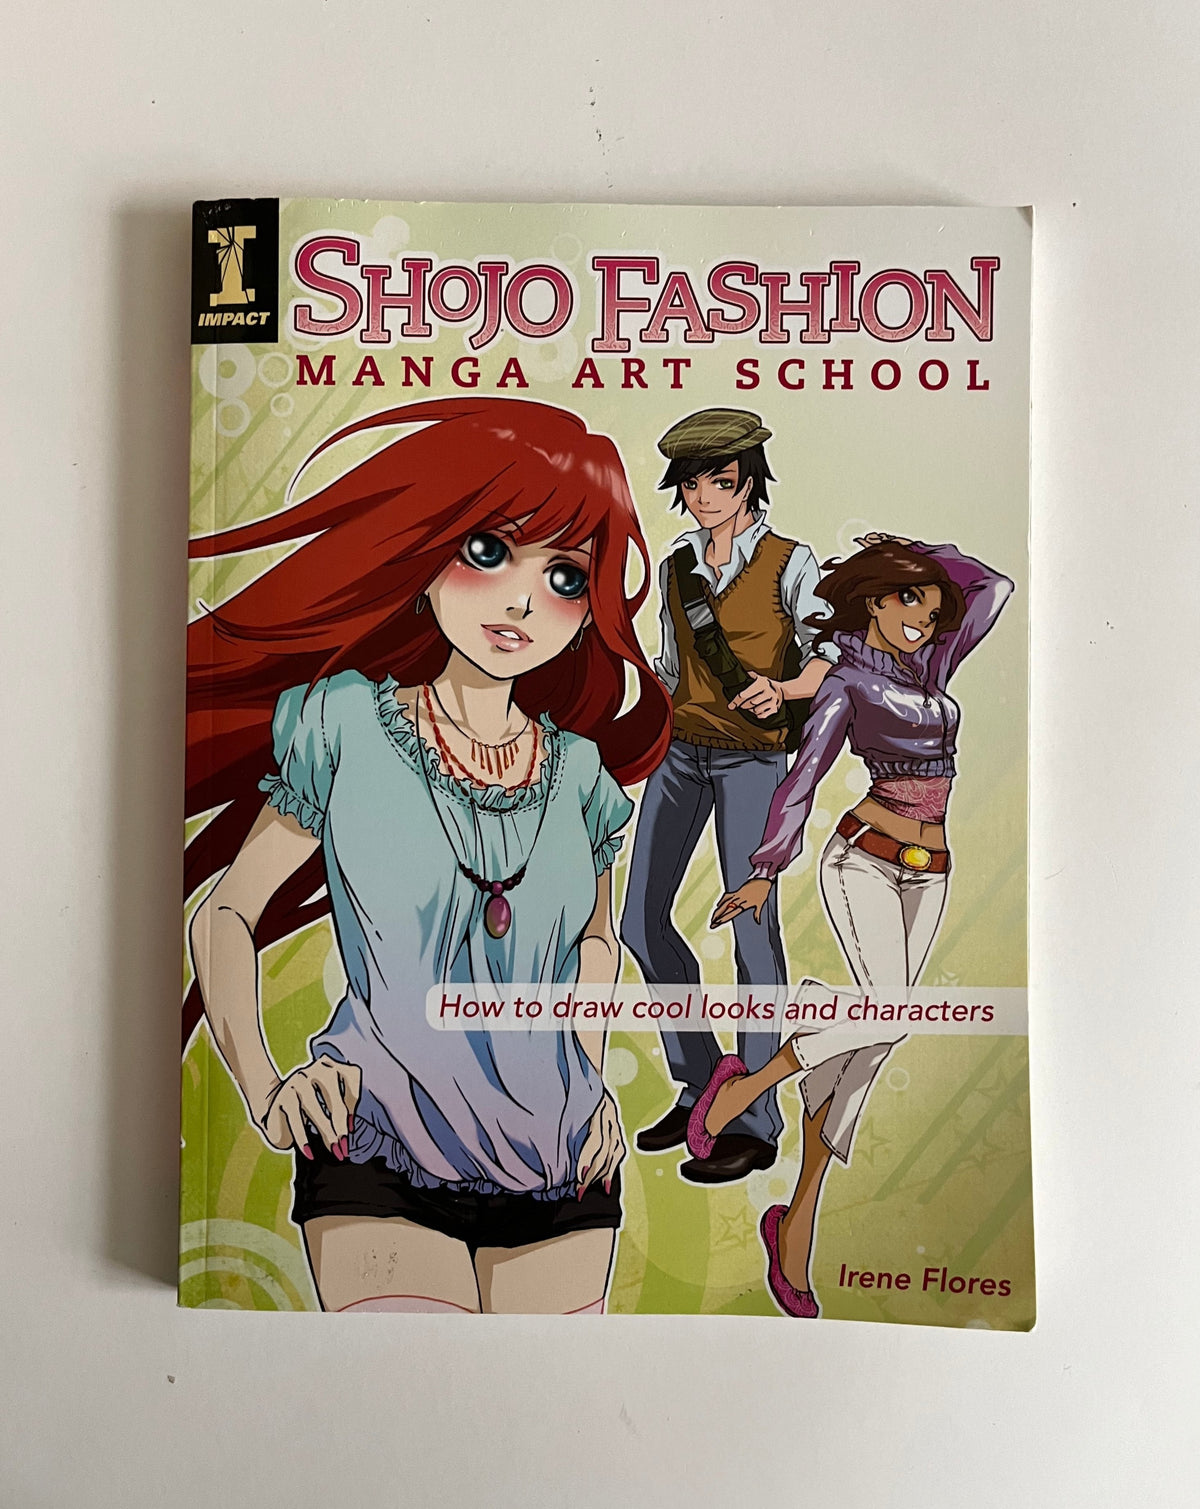 Shojo Fashion Manga Art School: How to Draw Cool Looks and Characters by Irene Flores